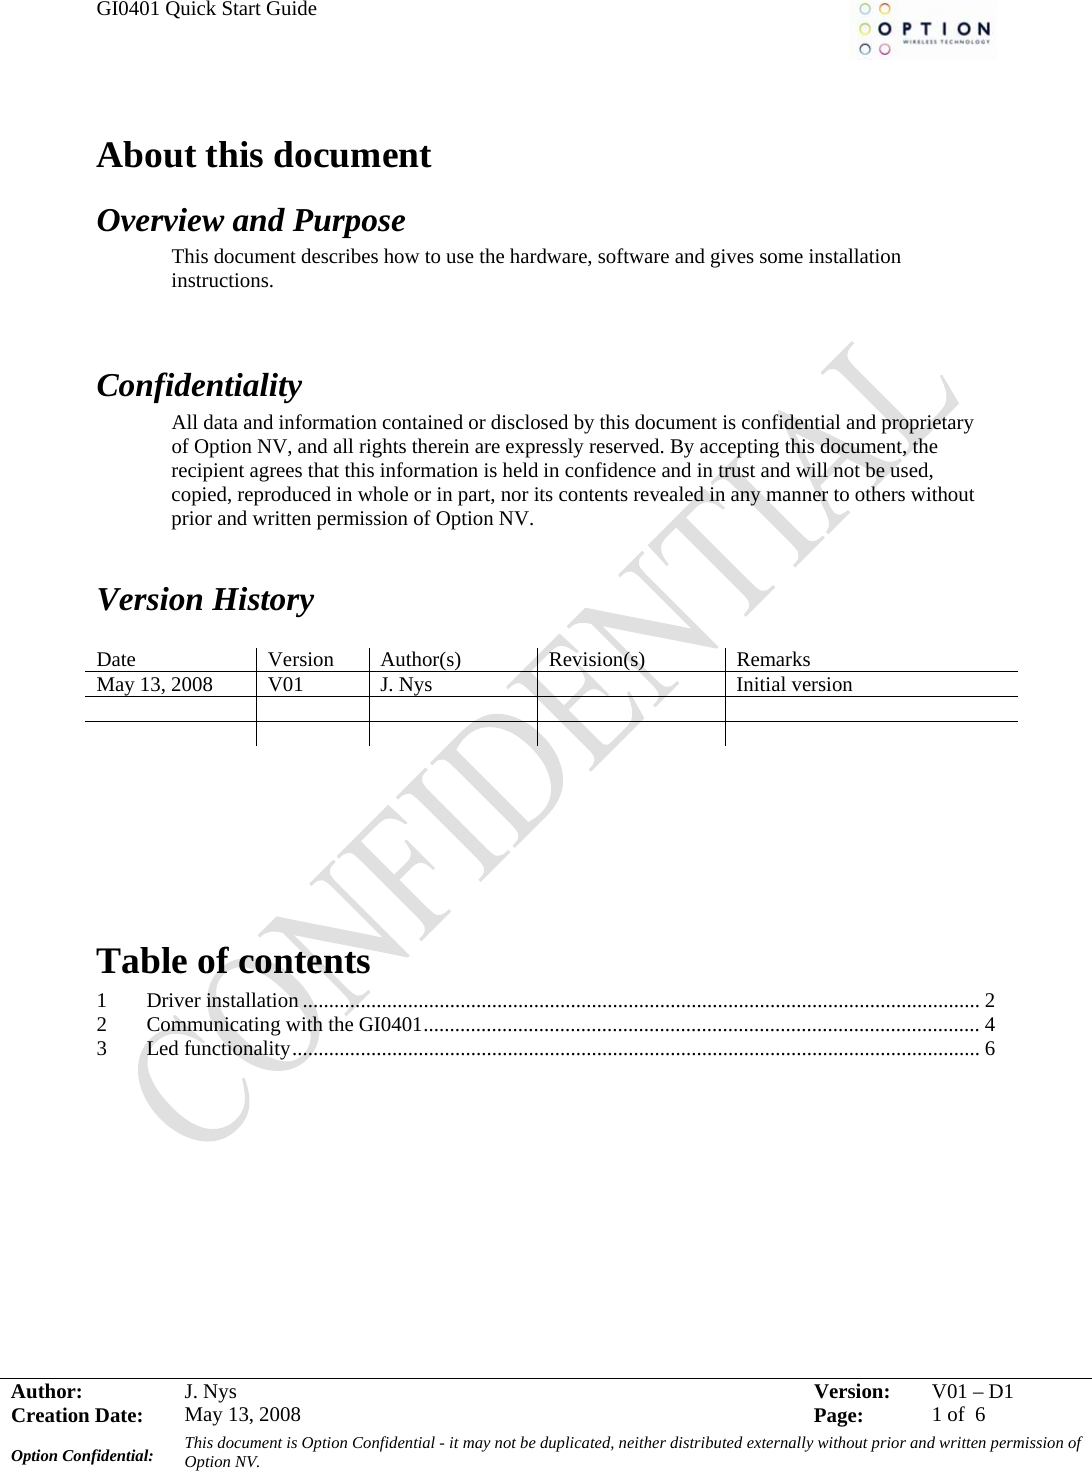 GI0401 Quick Start Guide     Author:  J. NAbout this document Overview and Purpose This document describes how to use the hardware, software and gives some installation instructions.   Confidentiality All data and information contained or disclosed by this document is confidential and proprietary of Option NV, and all rights therein are expressly reserved. By accepting this document, the recipient agrees that this information is held in confidence and in trust and will not be used, copied, reproduced in whole or in part, nor its contents revealed in any manner to others without prior and written permission of Option NV.    Version History  Date Version Author(s) Revision(s) Remarks May 13, 2008  V01  J. Nys    Initial version                    Table of contents 1 Driver installation ................................................................................................................................. 2 2 Communicating with the GI0401.......................................................................................................... 4 3 Led functionality................................................................................................................................... 6  ys  Version:  V01 –D1Creation Date:  May 13, 2008    Page:  1 of  6 Option Confidential:  This document is Option Confidential - it may not be duplicated, neither distributed externally without prior and written permission of Option NV.    